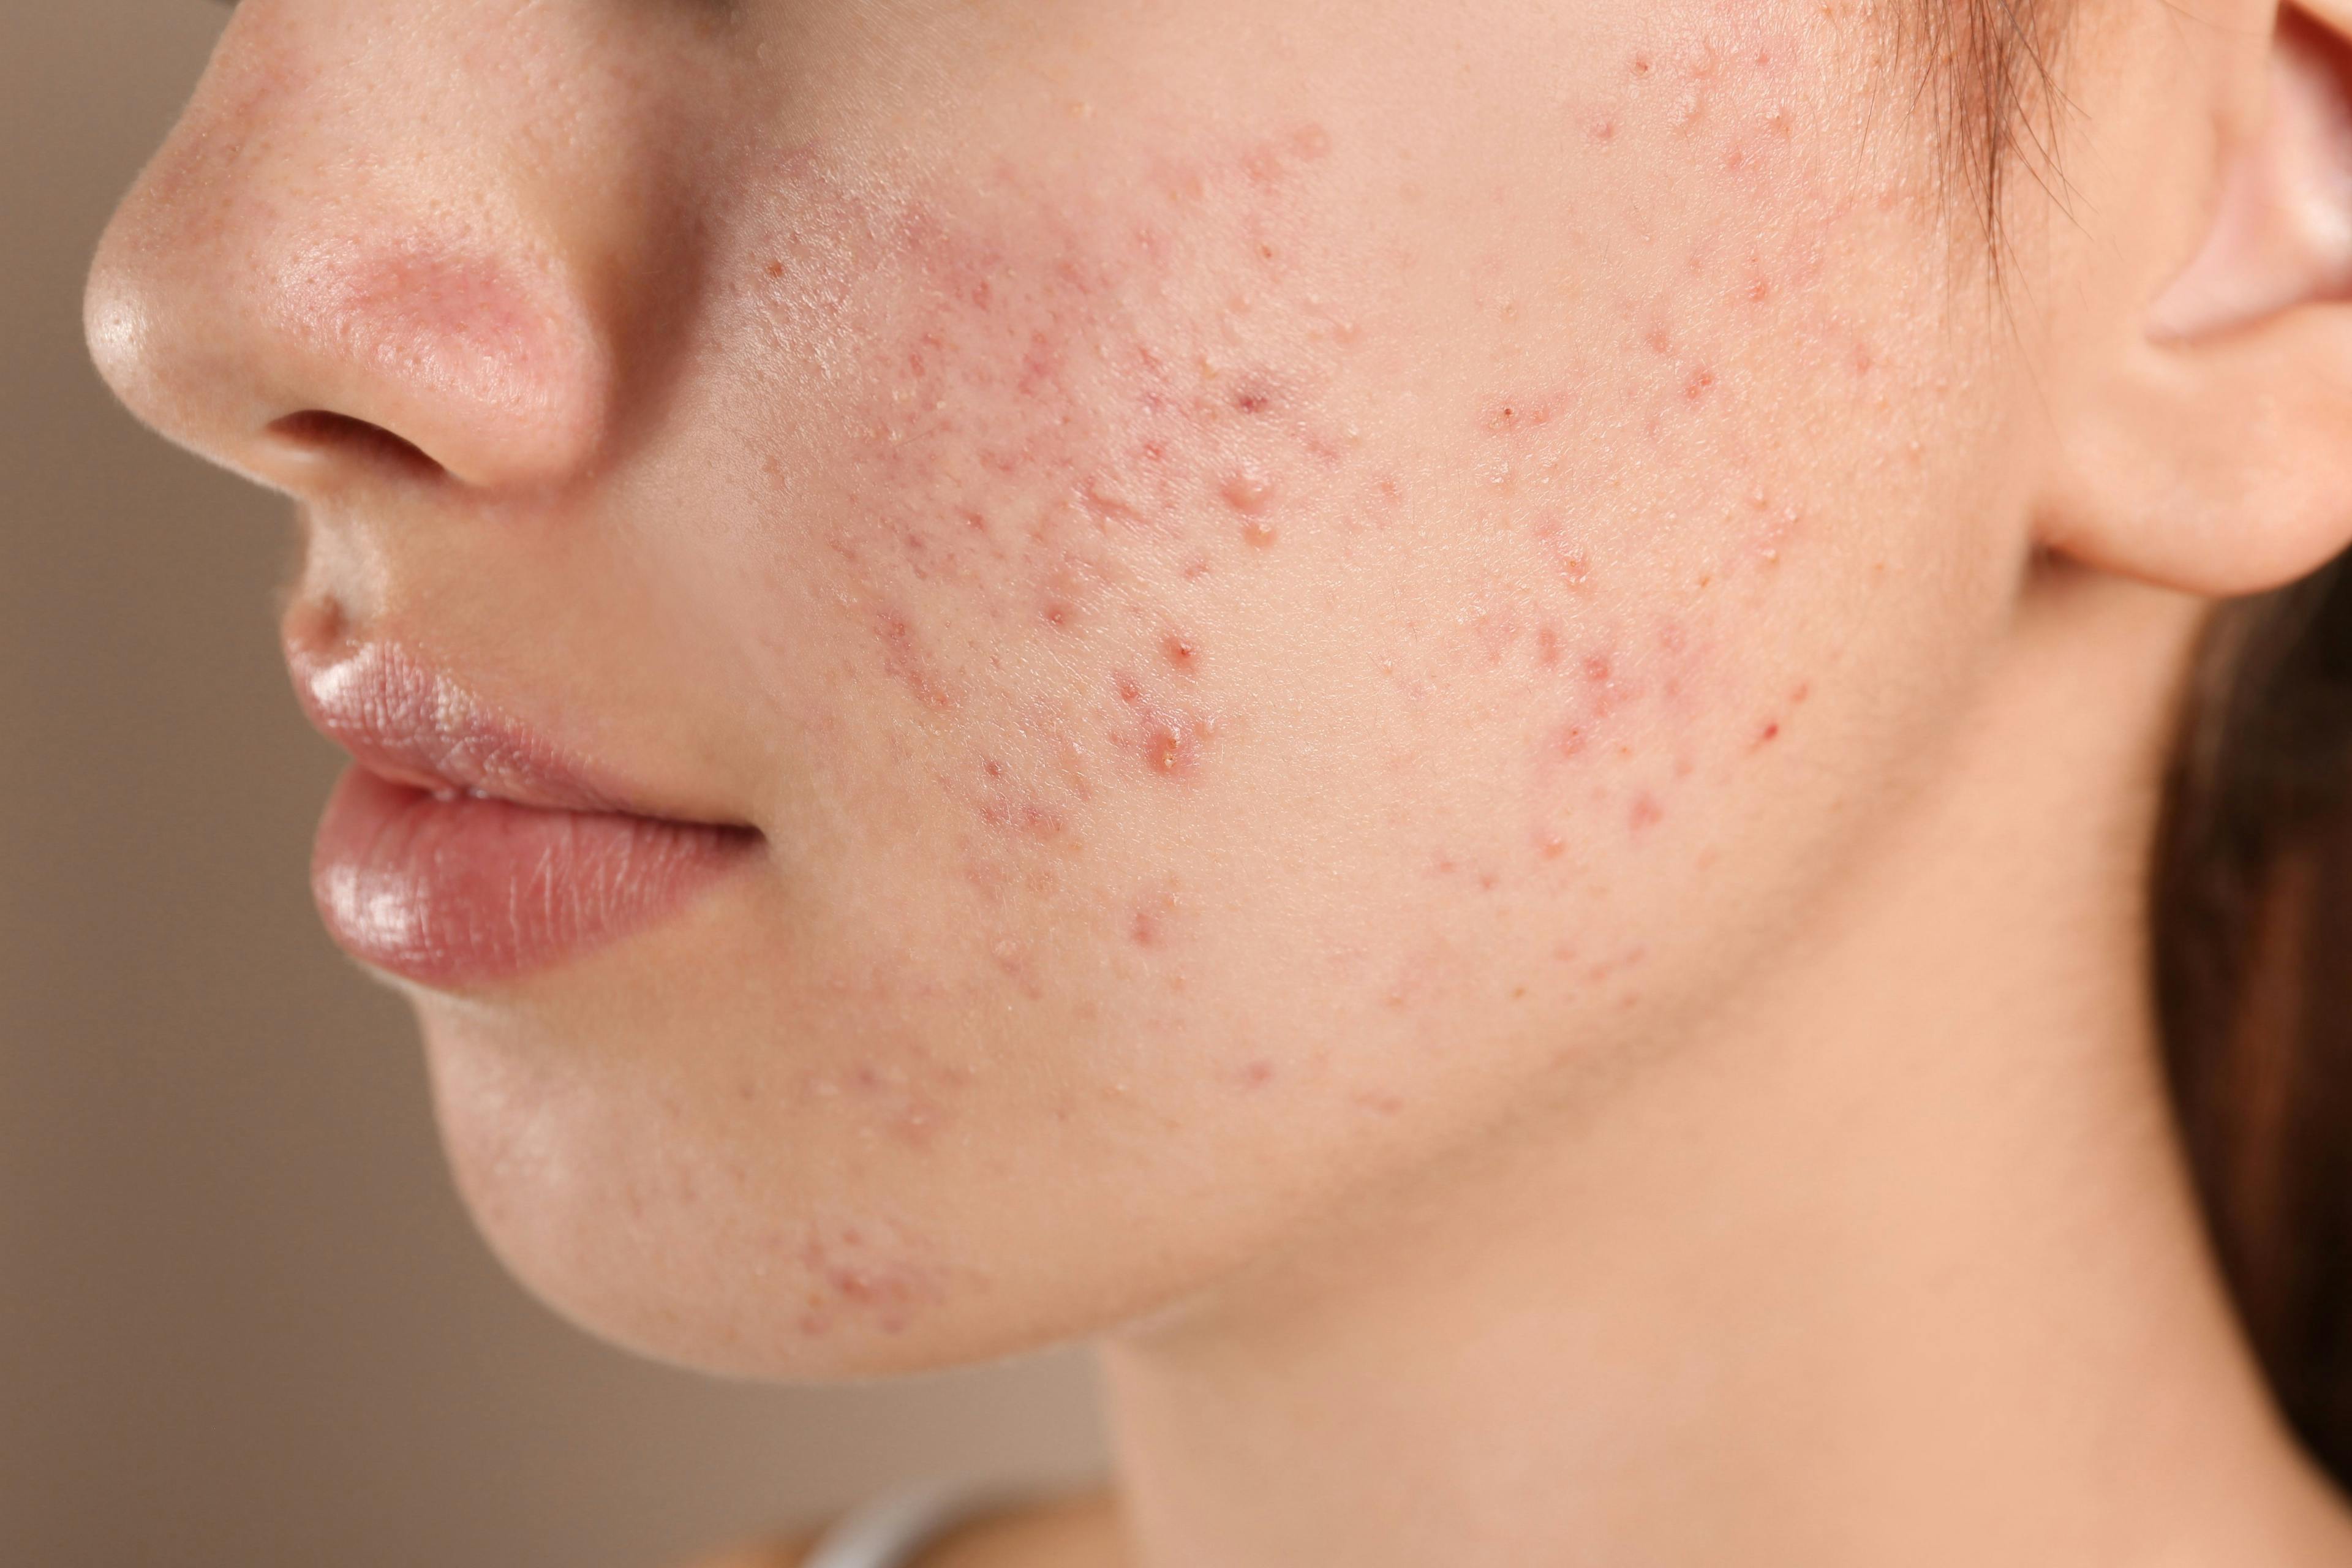 New Pediatric Perspectives for Acne